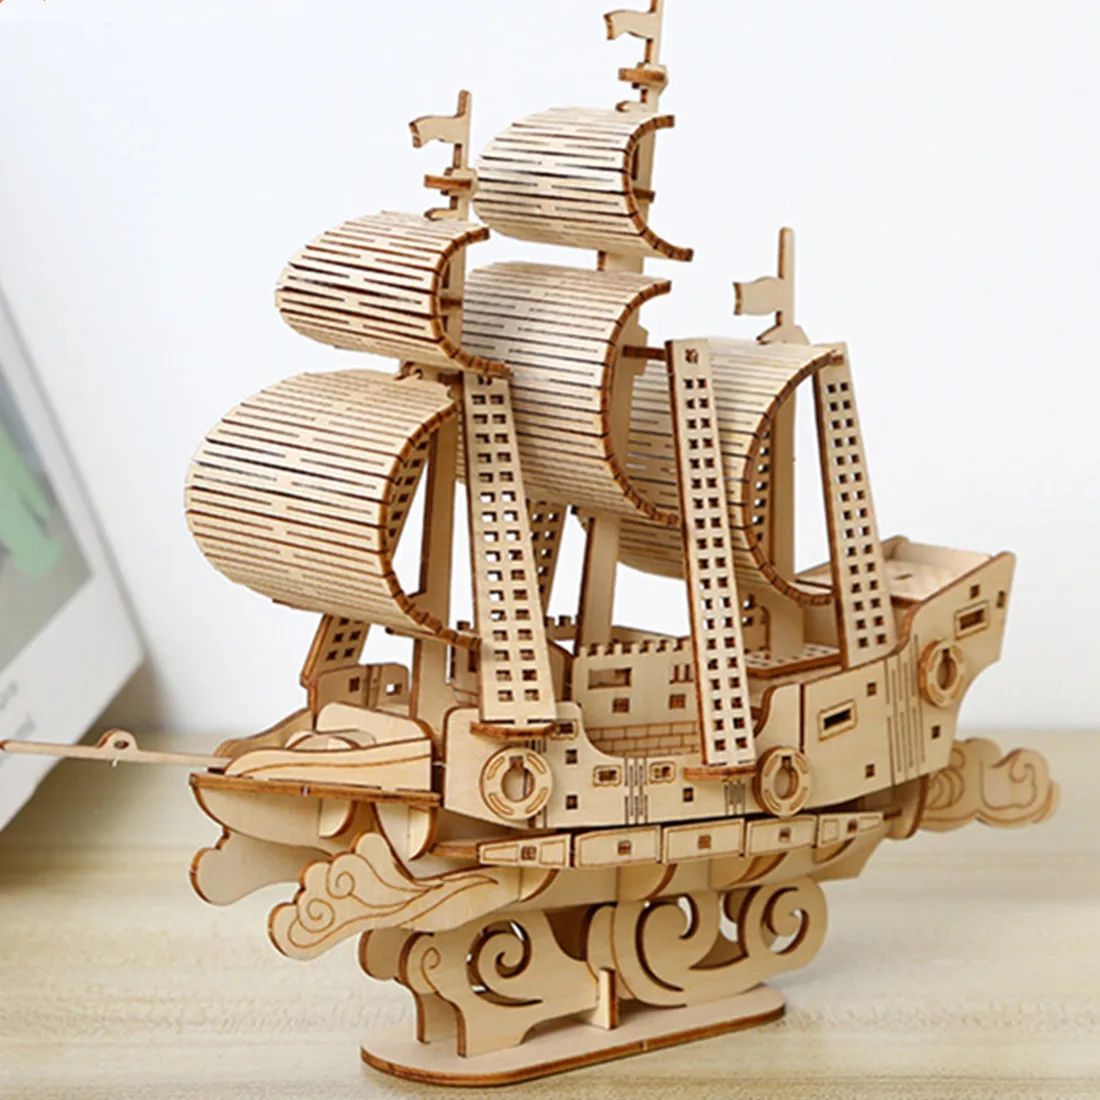 3D Puzzles Wooden Ocean Sailing Model Handmade Boat Building BlockS Kits DIY Assembly Ship Toy for Kids Adults GiftS fsl aluminum alloy thruster fsr o series of 6mm hard shaft thruster assembly special for racing ship model